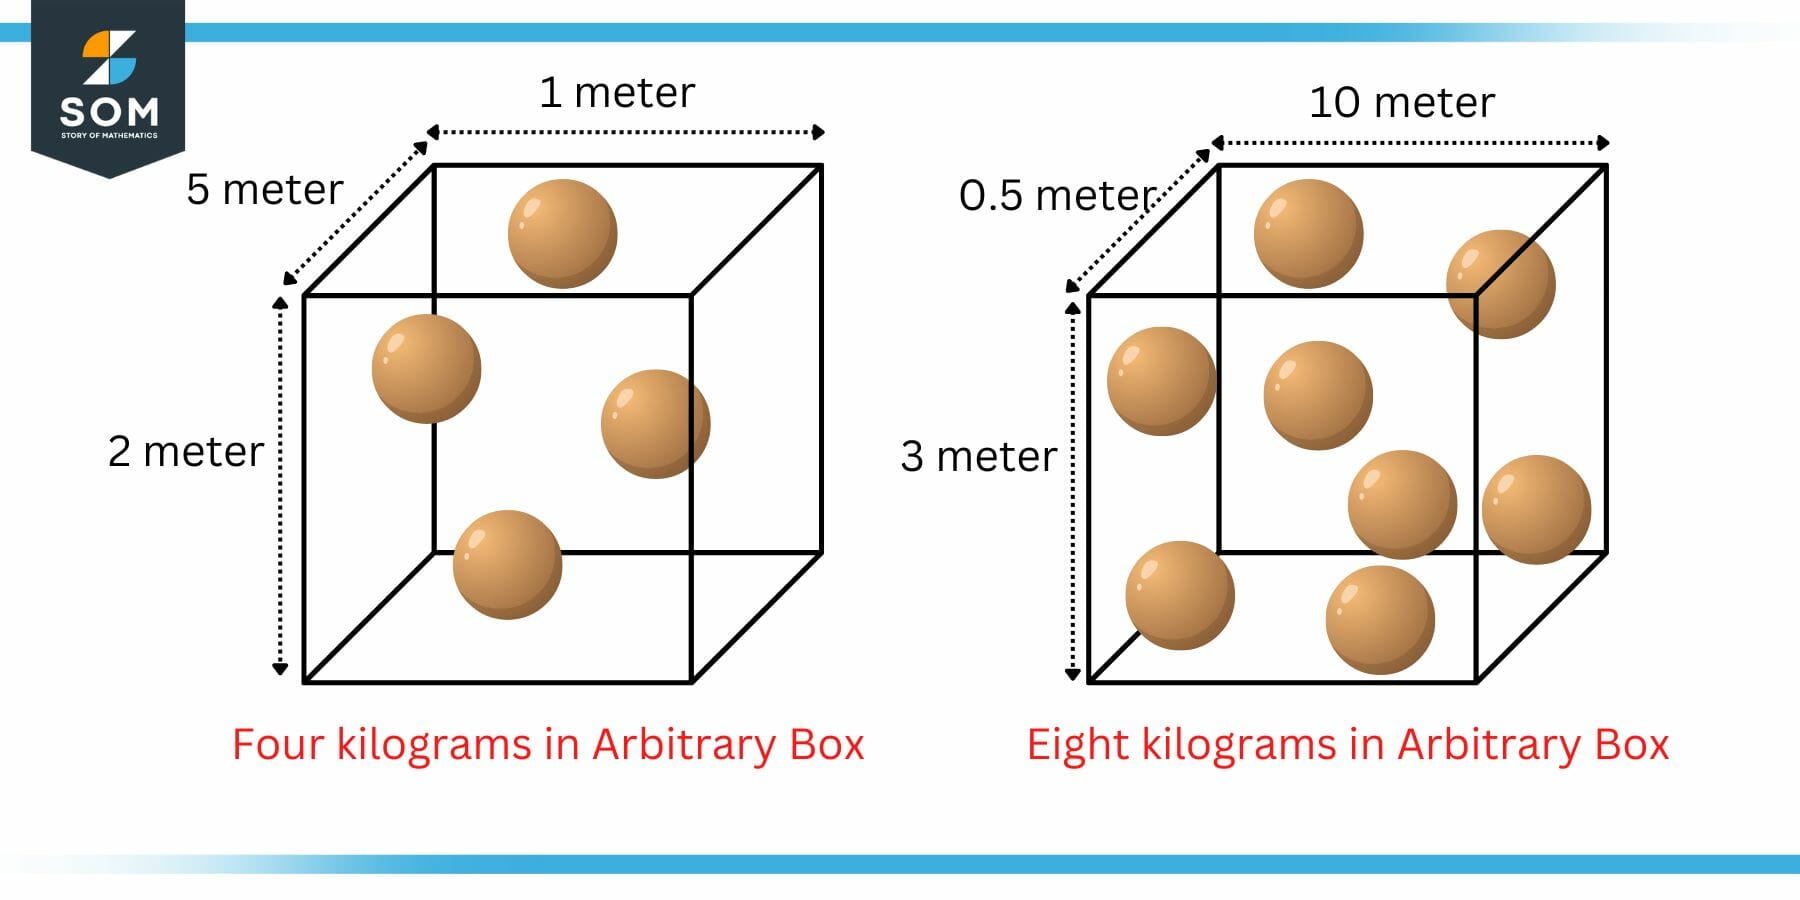 https://www.storyofmathematics.com/wp-content/uploads/2022/11/Example-of-Density-with-Arbitrary-Cube-Size.jpg